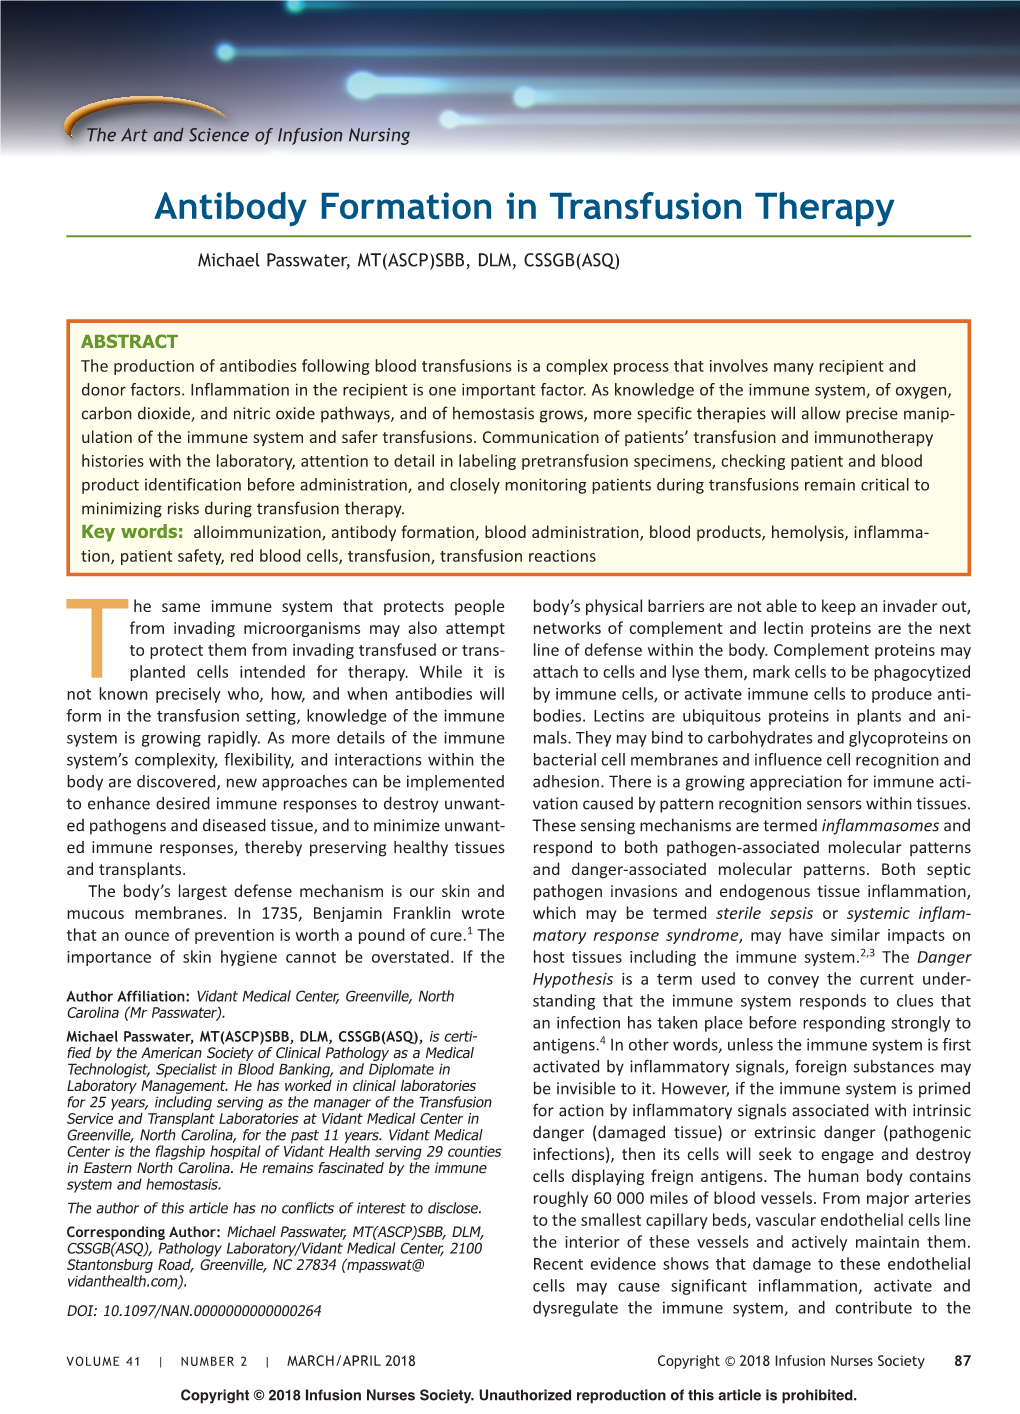 Antibody Formation in Transfusion Therapy